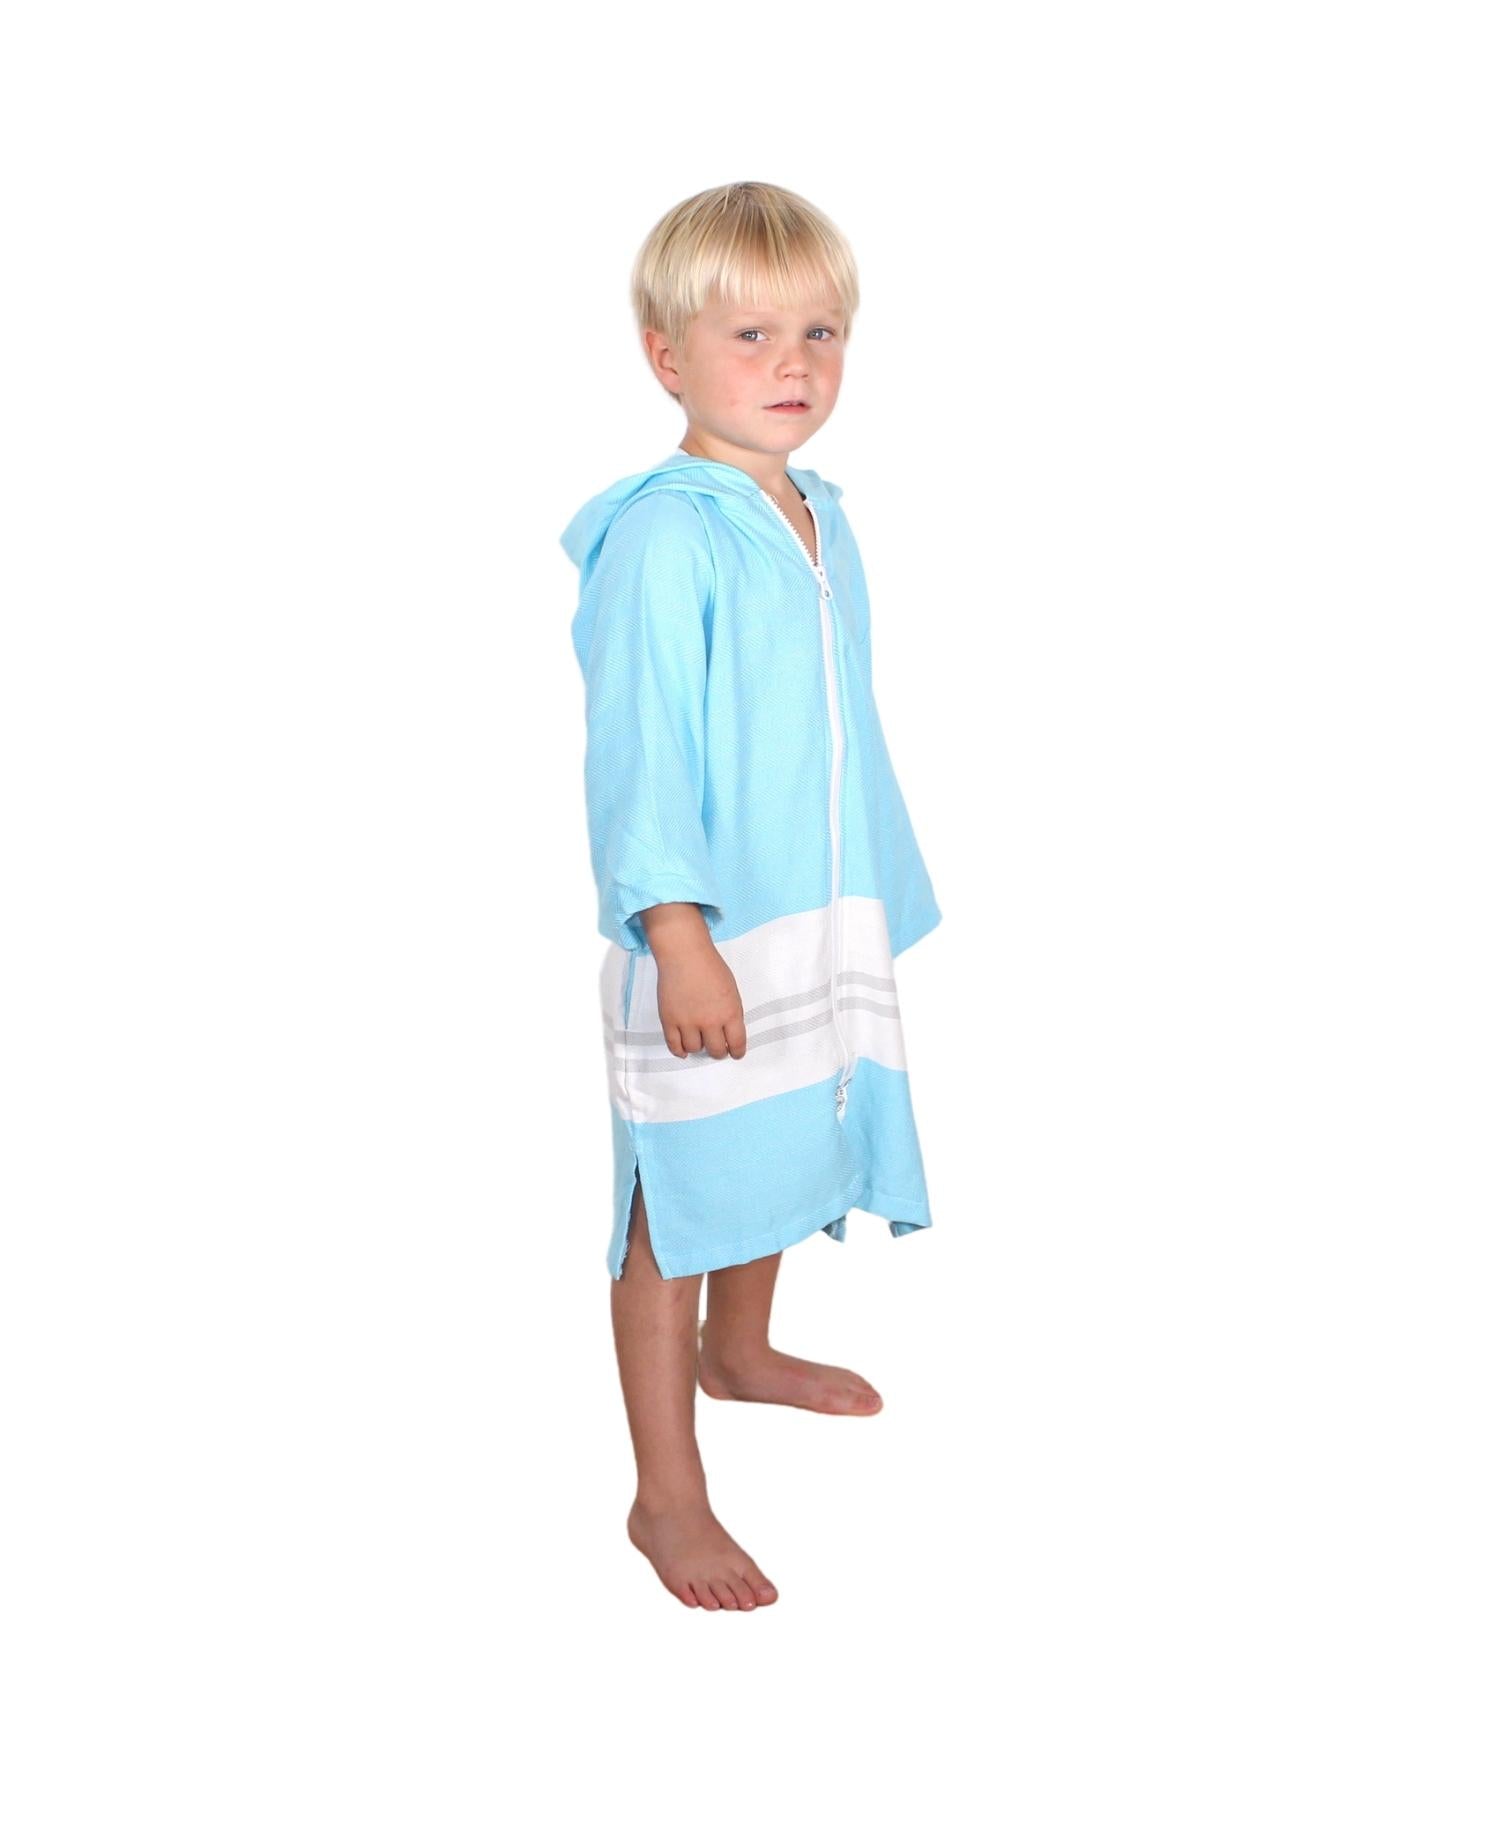 RETRO GROOVE YOUTH TOWEL PONCHO - HOODED TOWEL